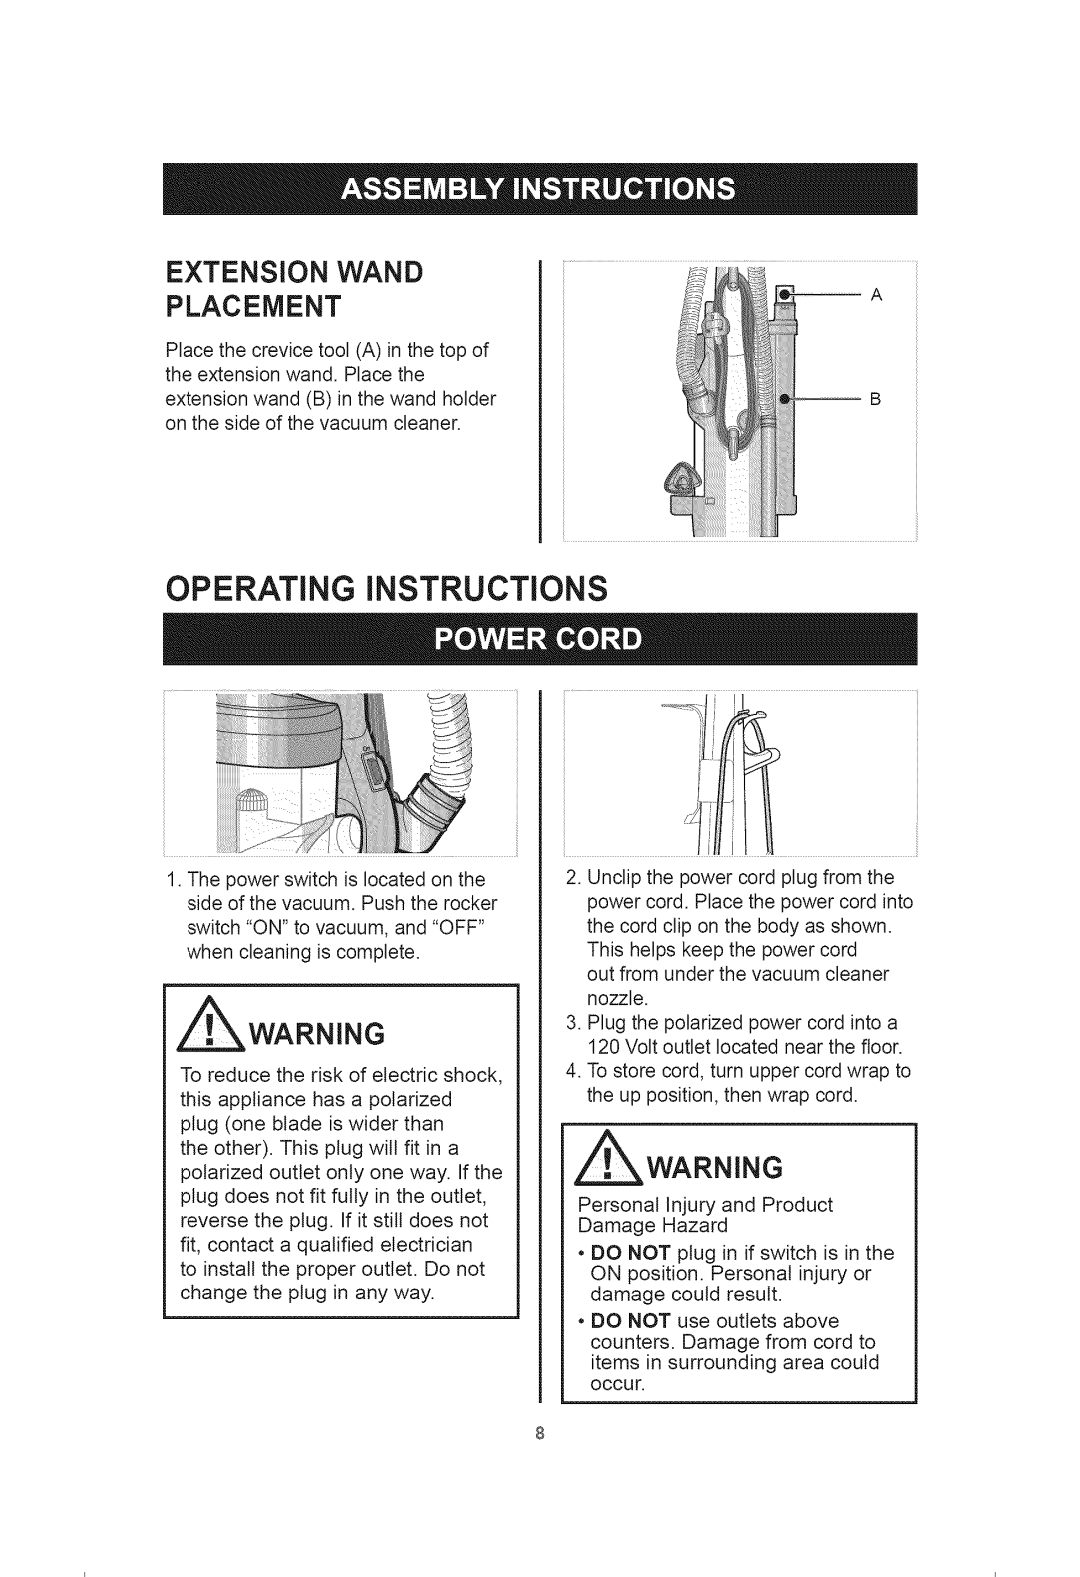 Kenmore 401.39000 manual Extension Wand Placement, Awarning, OPERATING iNSTRUCTiONS 